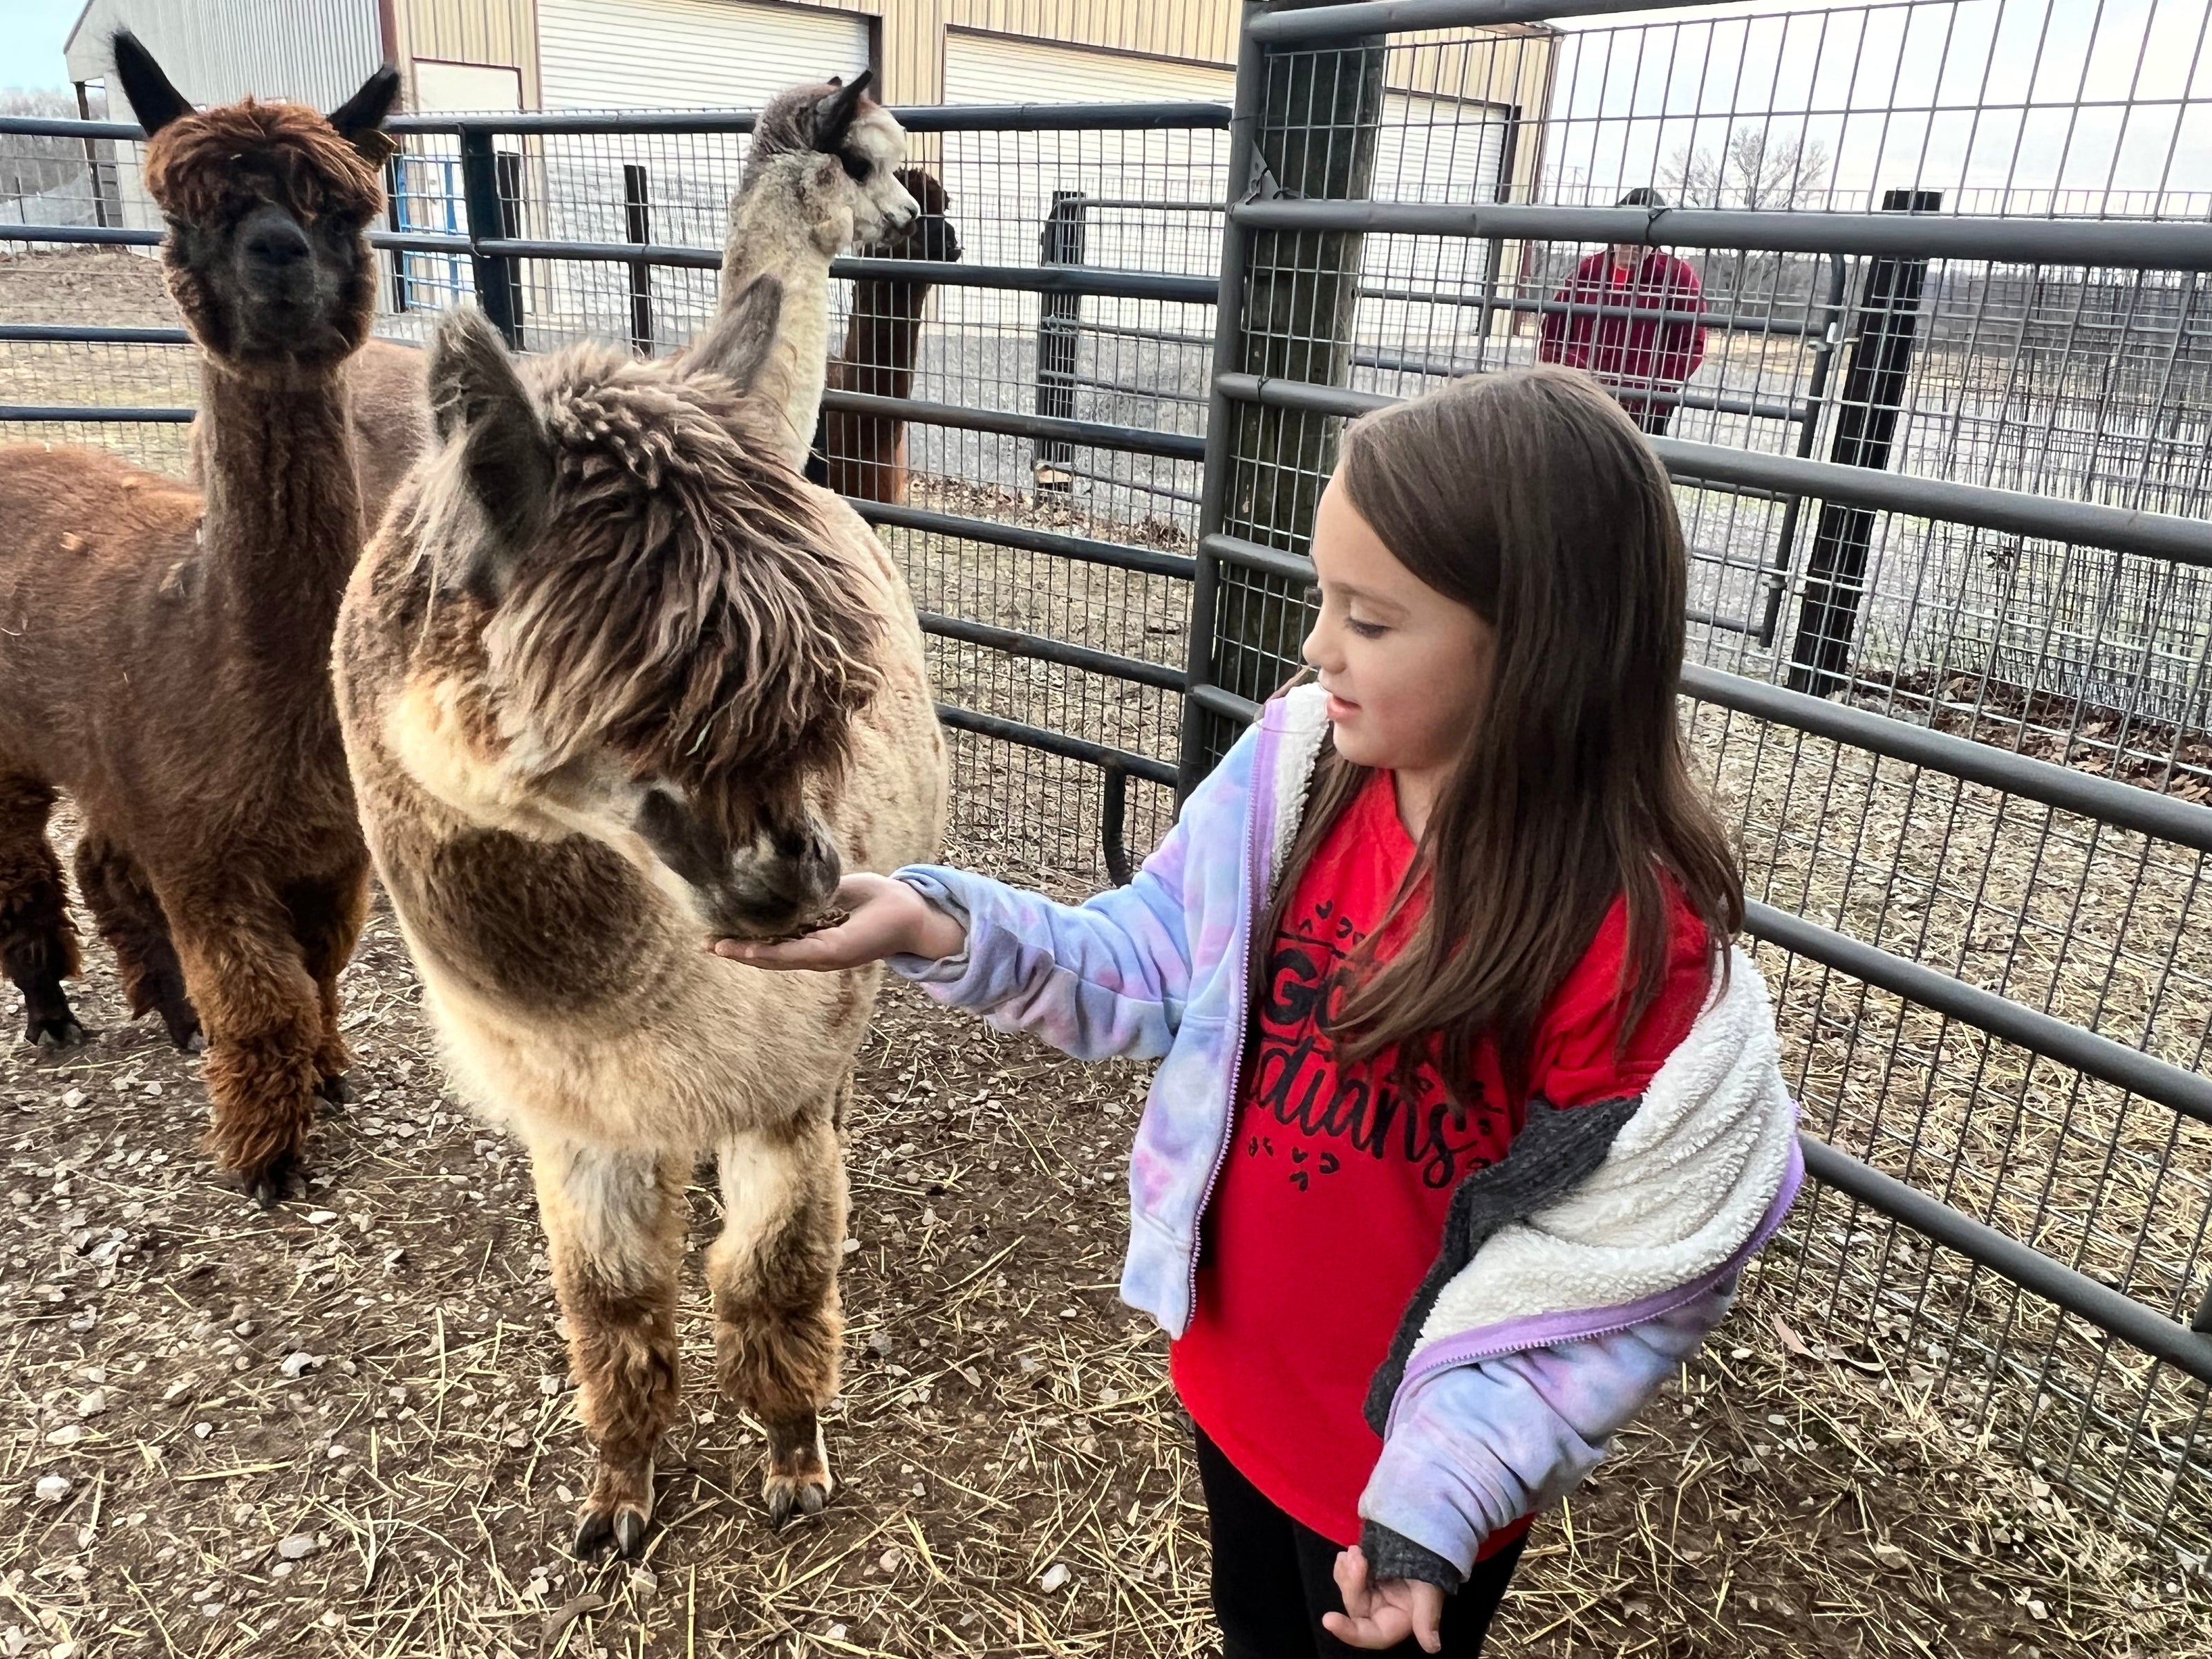 Hands-on alpaca feeding experience for all ages